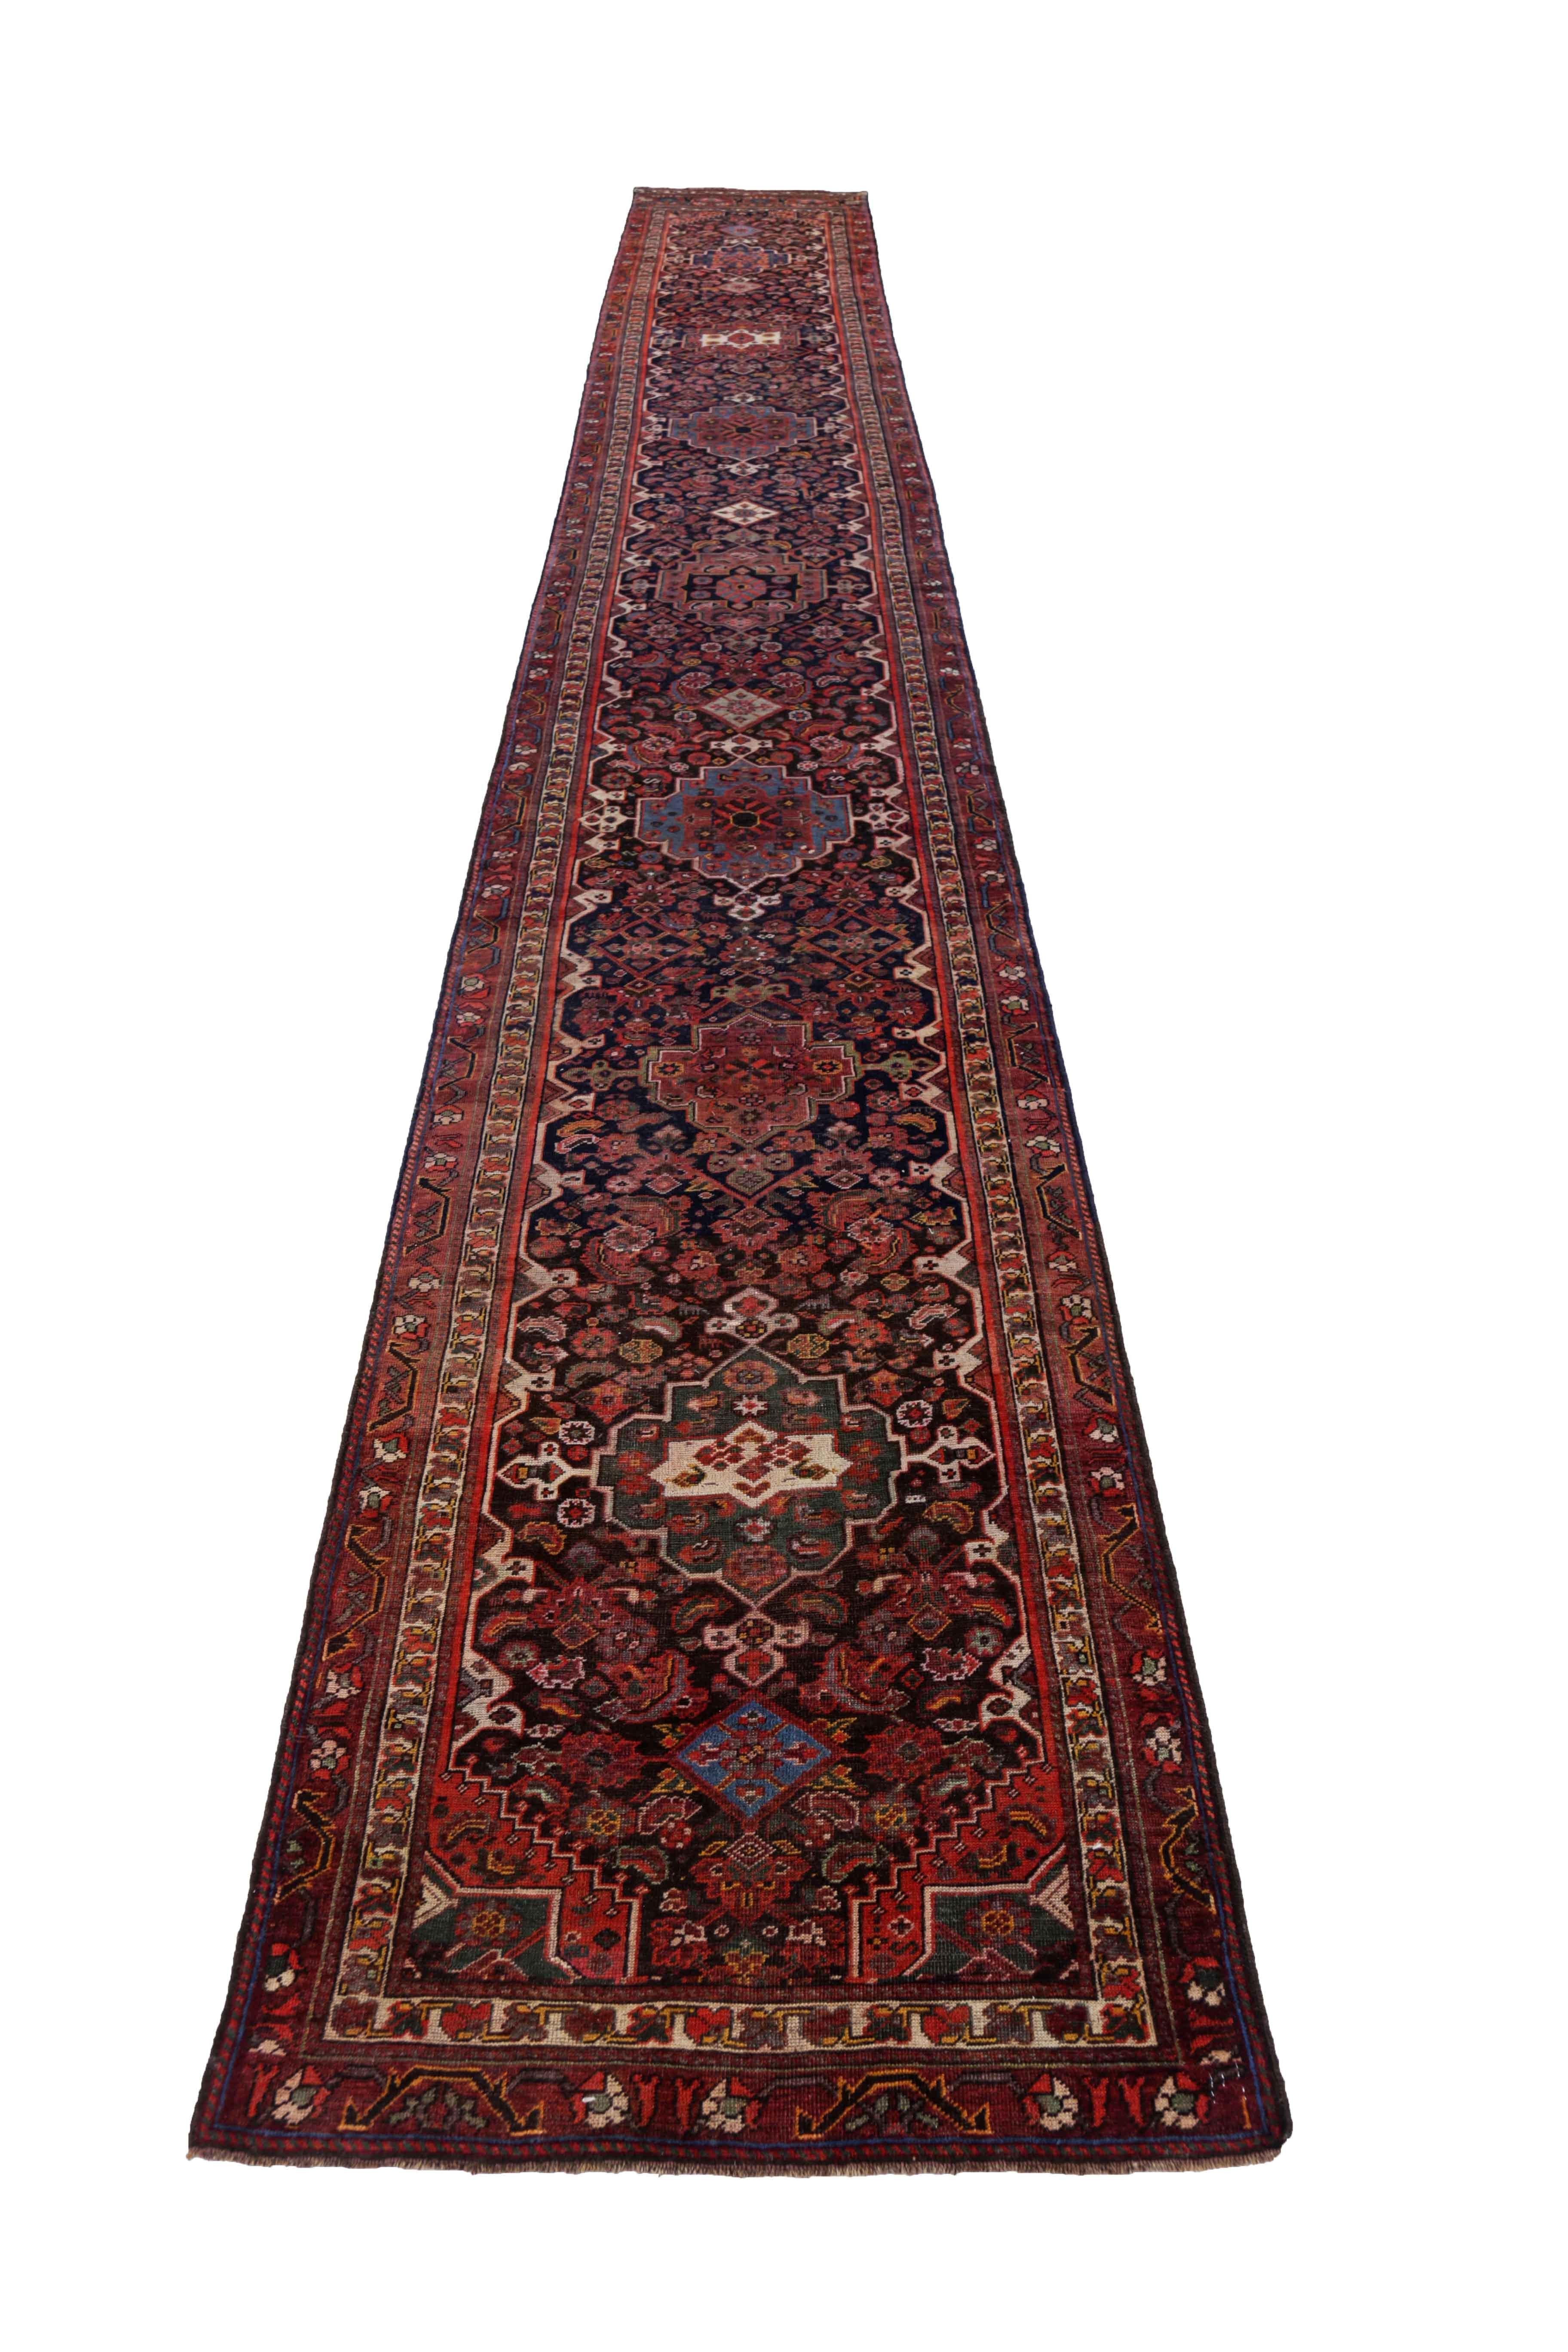 Antique Persian runner rug handwoven from the finest sheep’s wool. It’s colored with all-natural vegetable dyes that are safe for humans and pets. It’s a traditional Shiraz design handwoven by expert artisans. It’s a lovely runner rug that can be